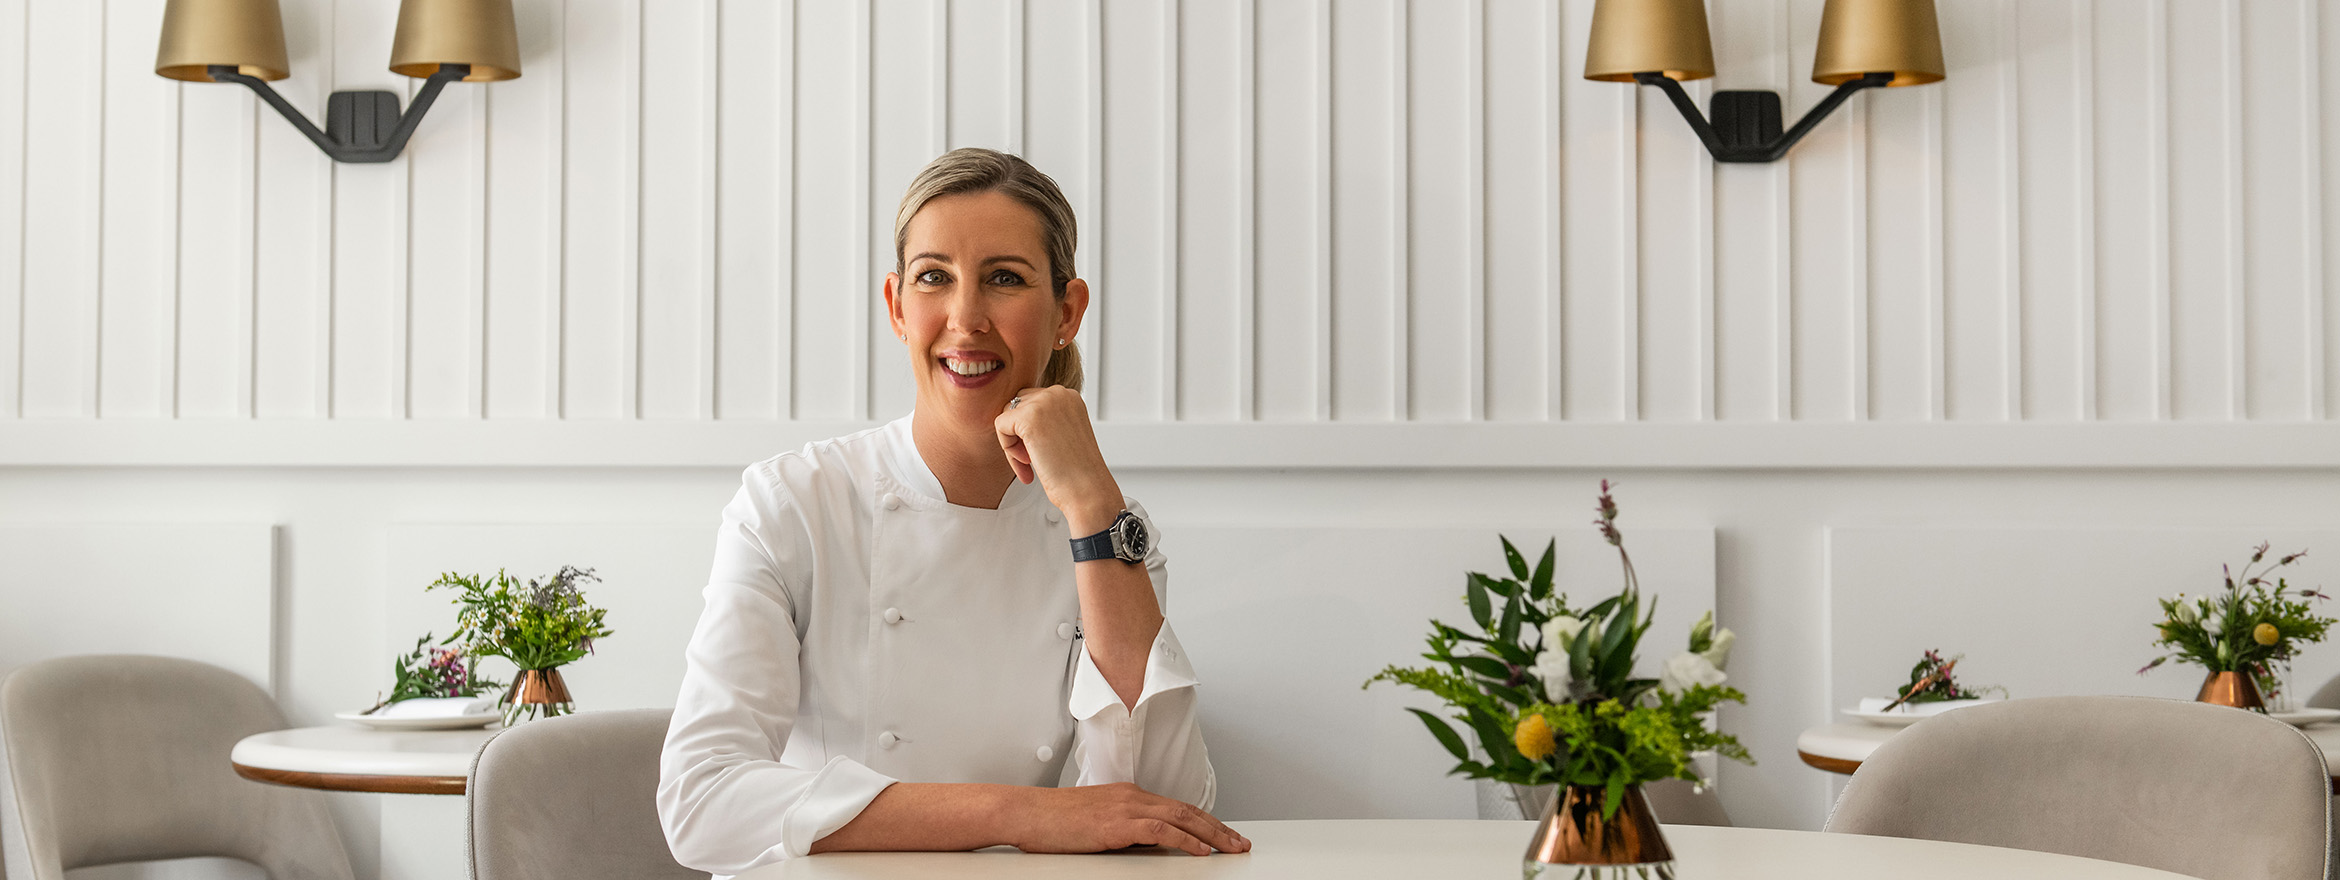 Clare Smyth, Acclaimed Chef and Friend of Hublot, on how Timing is of the Essence